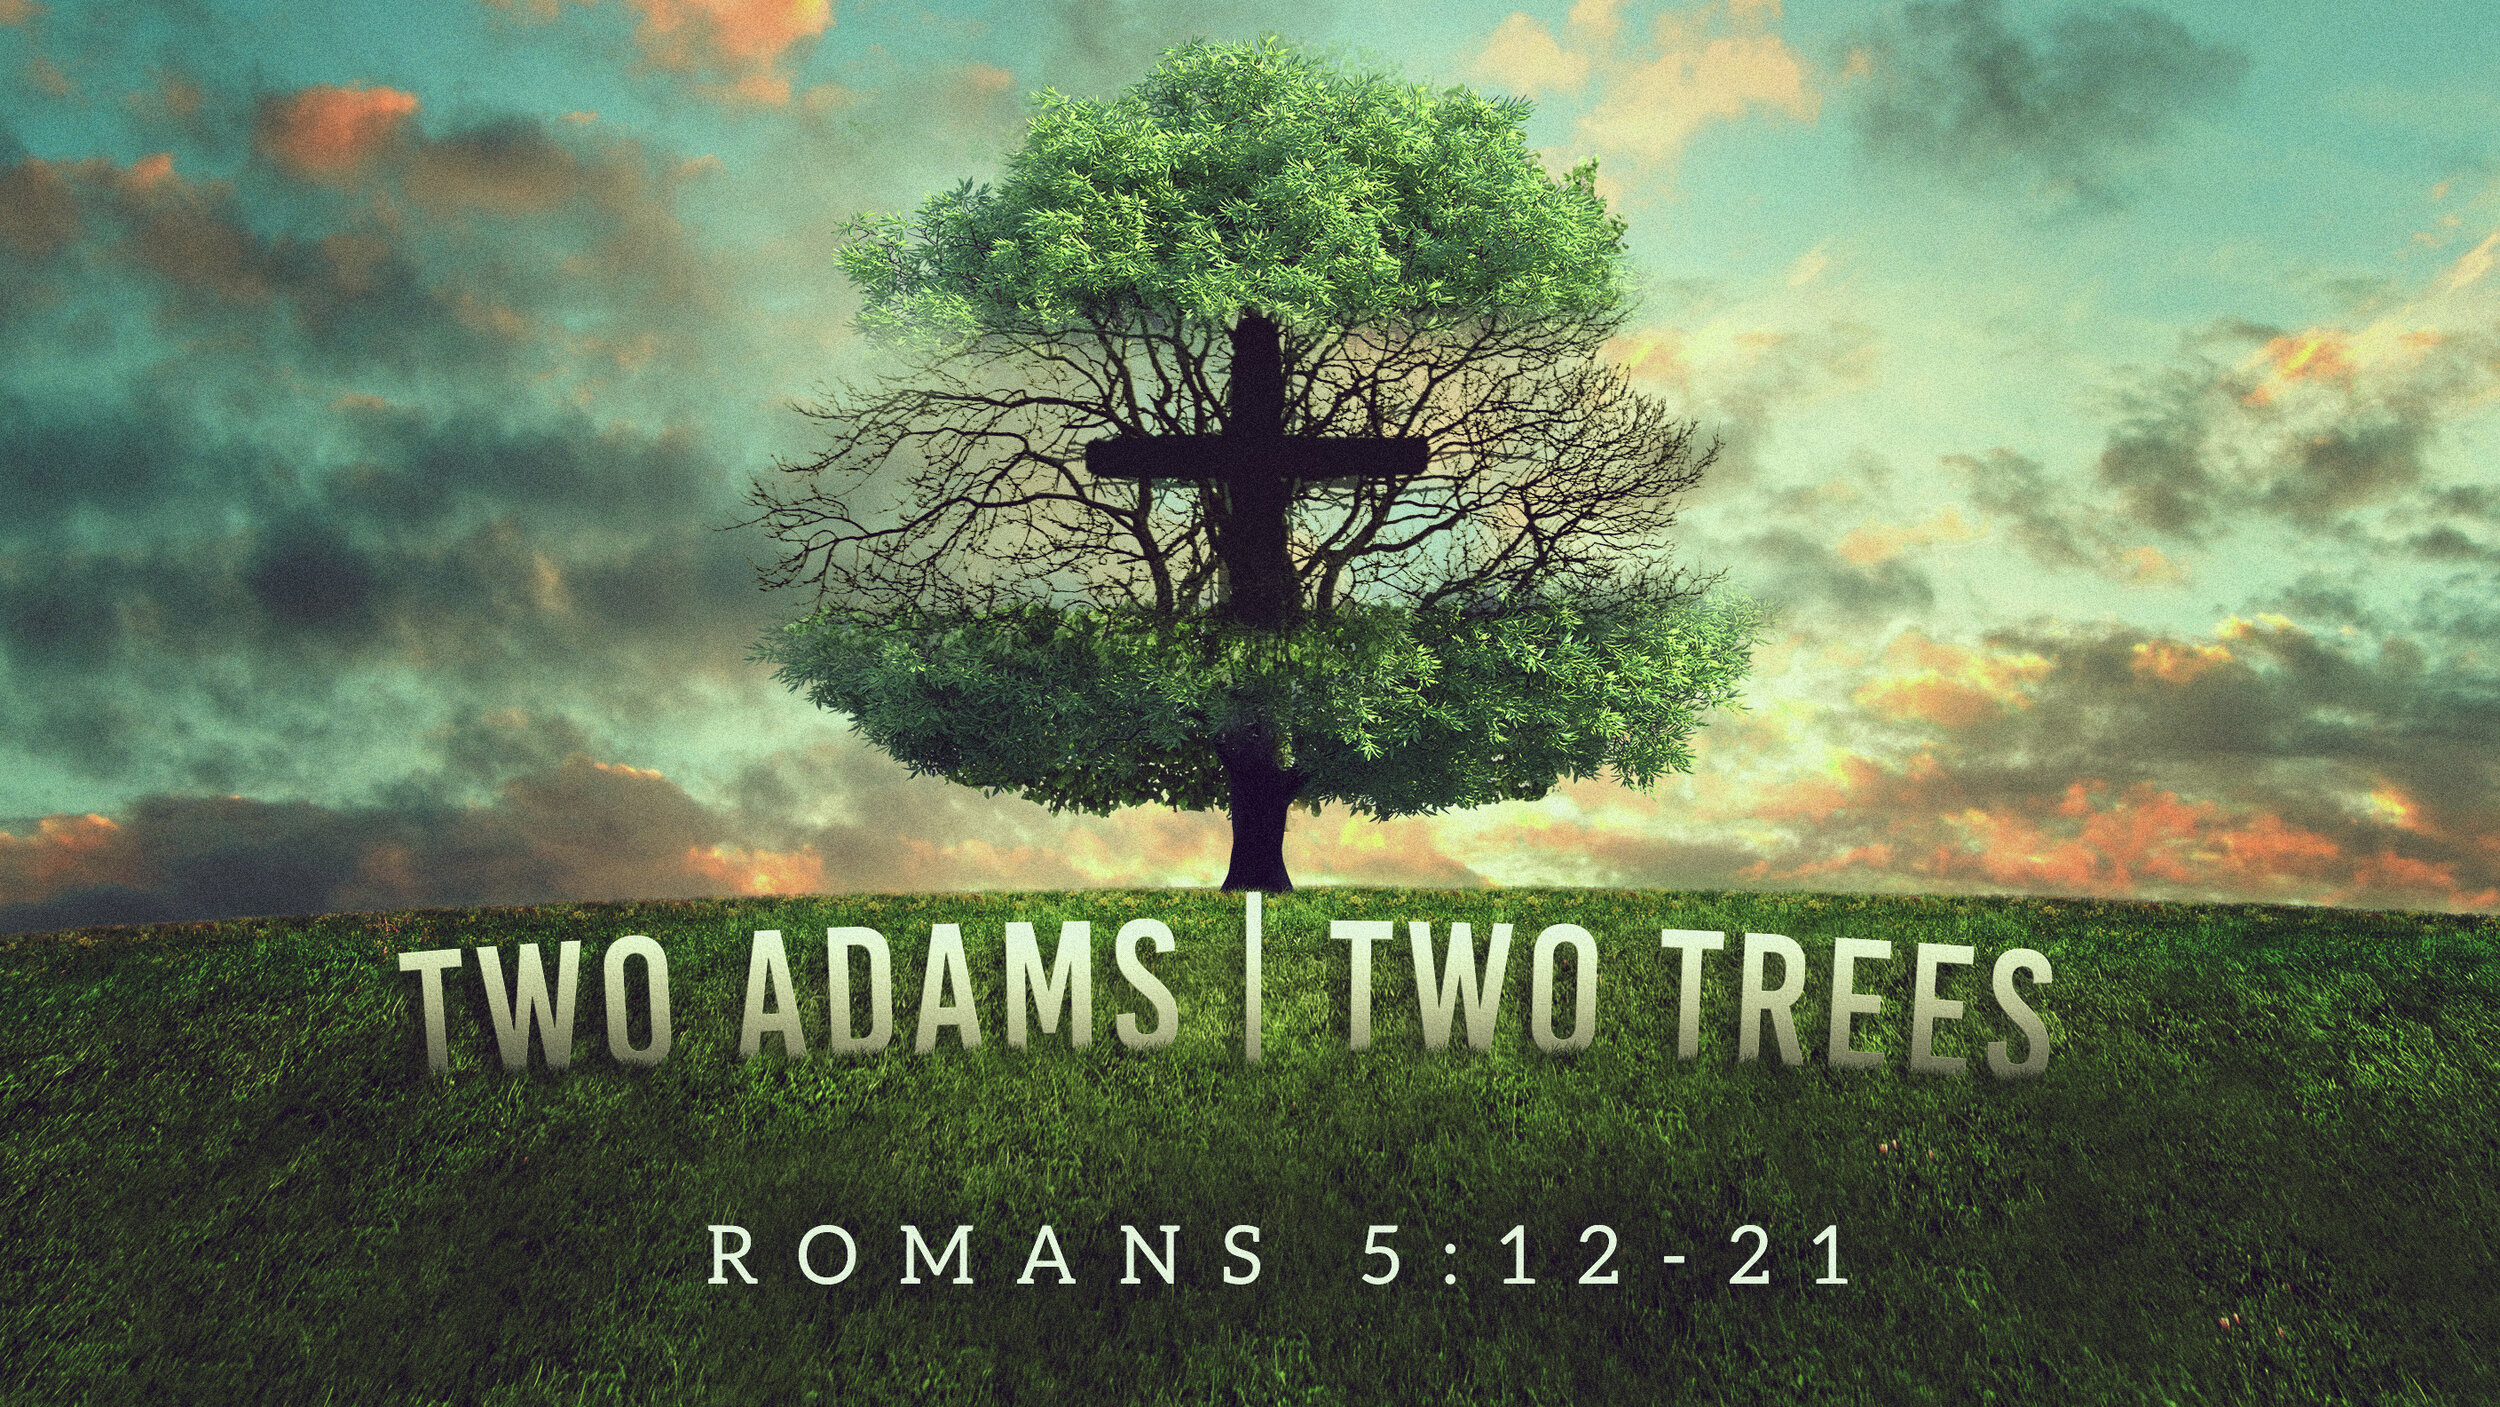 Two Adams, Two Trees